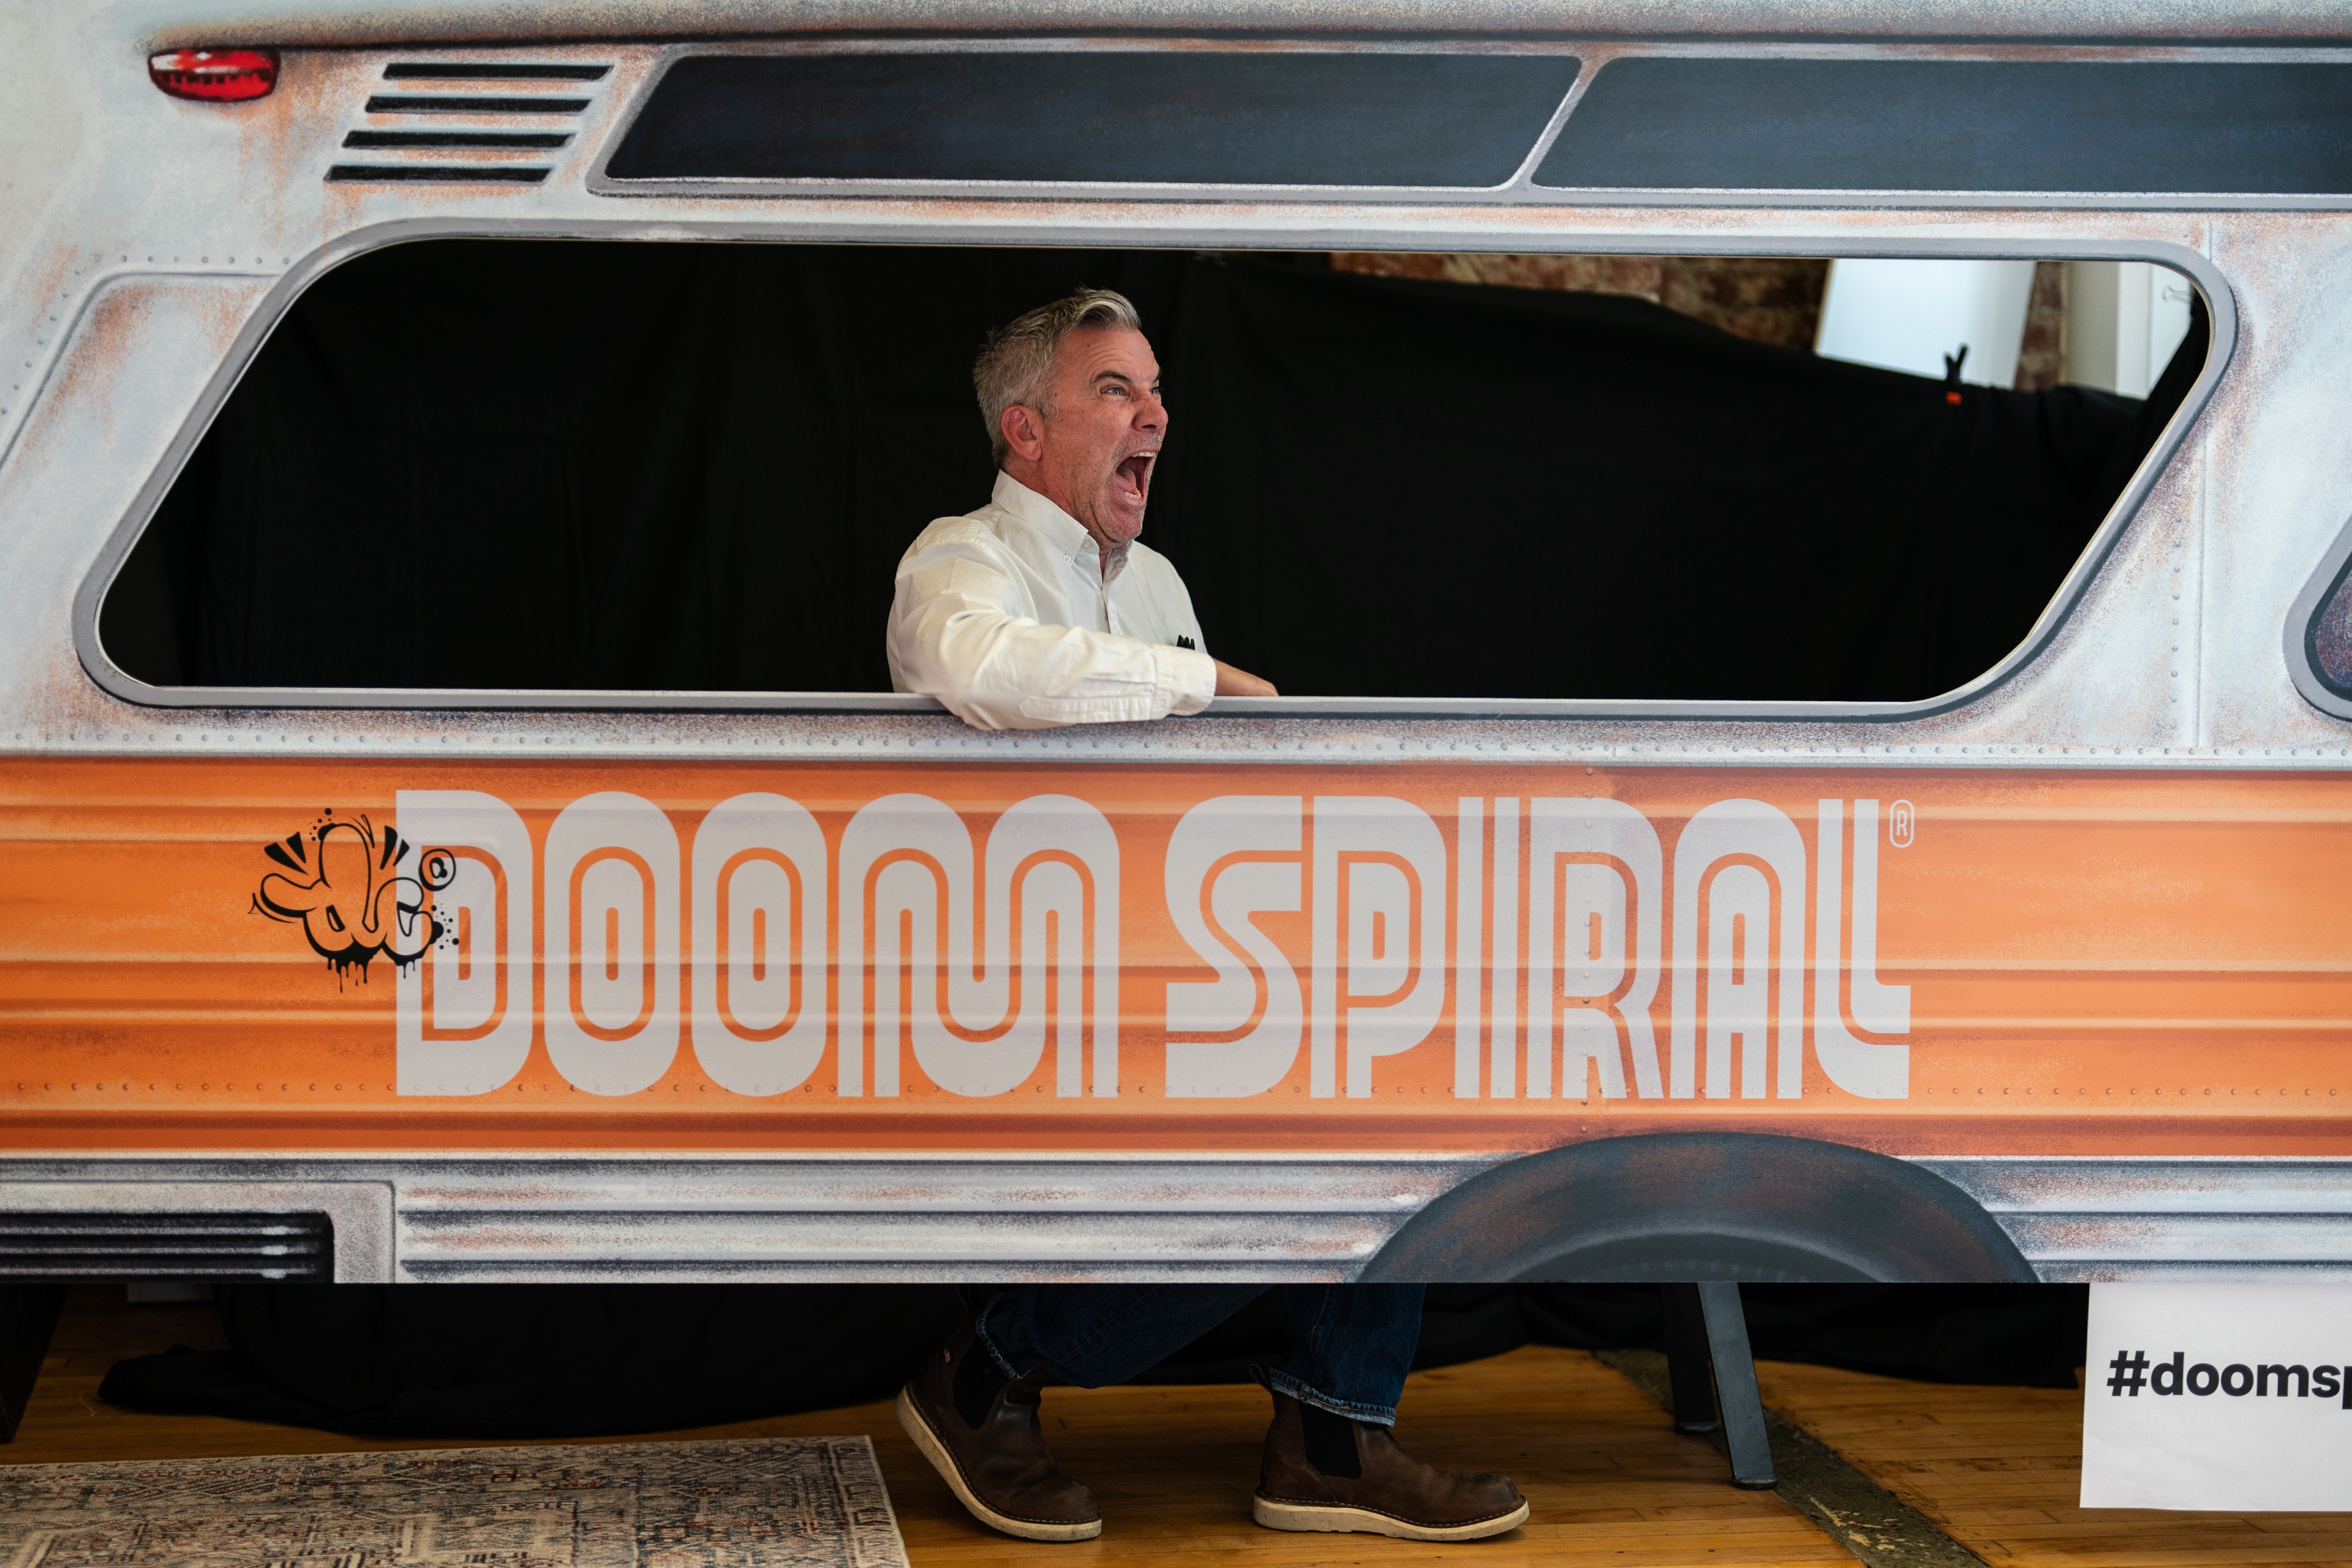 A man joyfully leans out of a faux vehicle window with the words "DOOM SPIRAL" on it. The scene has a playful, animated atmosphere with a hashtag nearby.